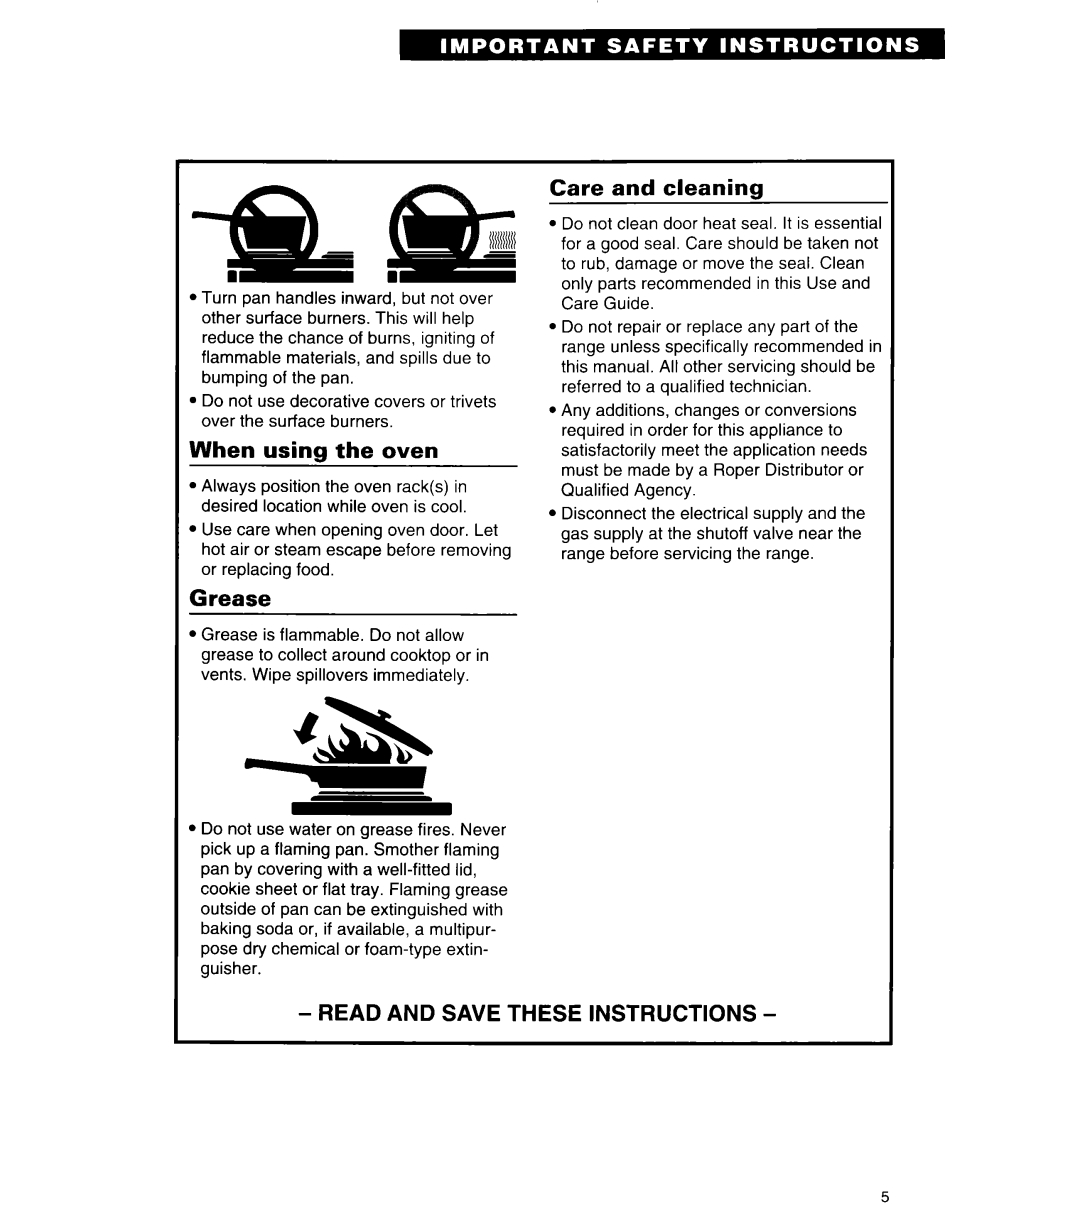 Roper FGP335Y Read And Save These Instructions, When using the oven, Grease, Care and cleaning 